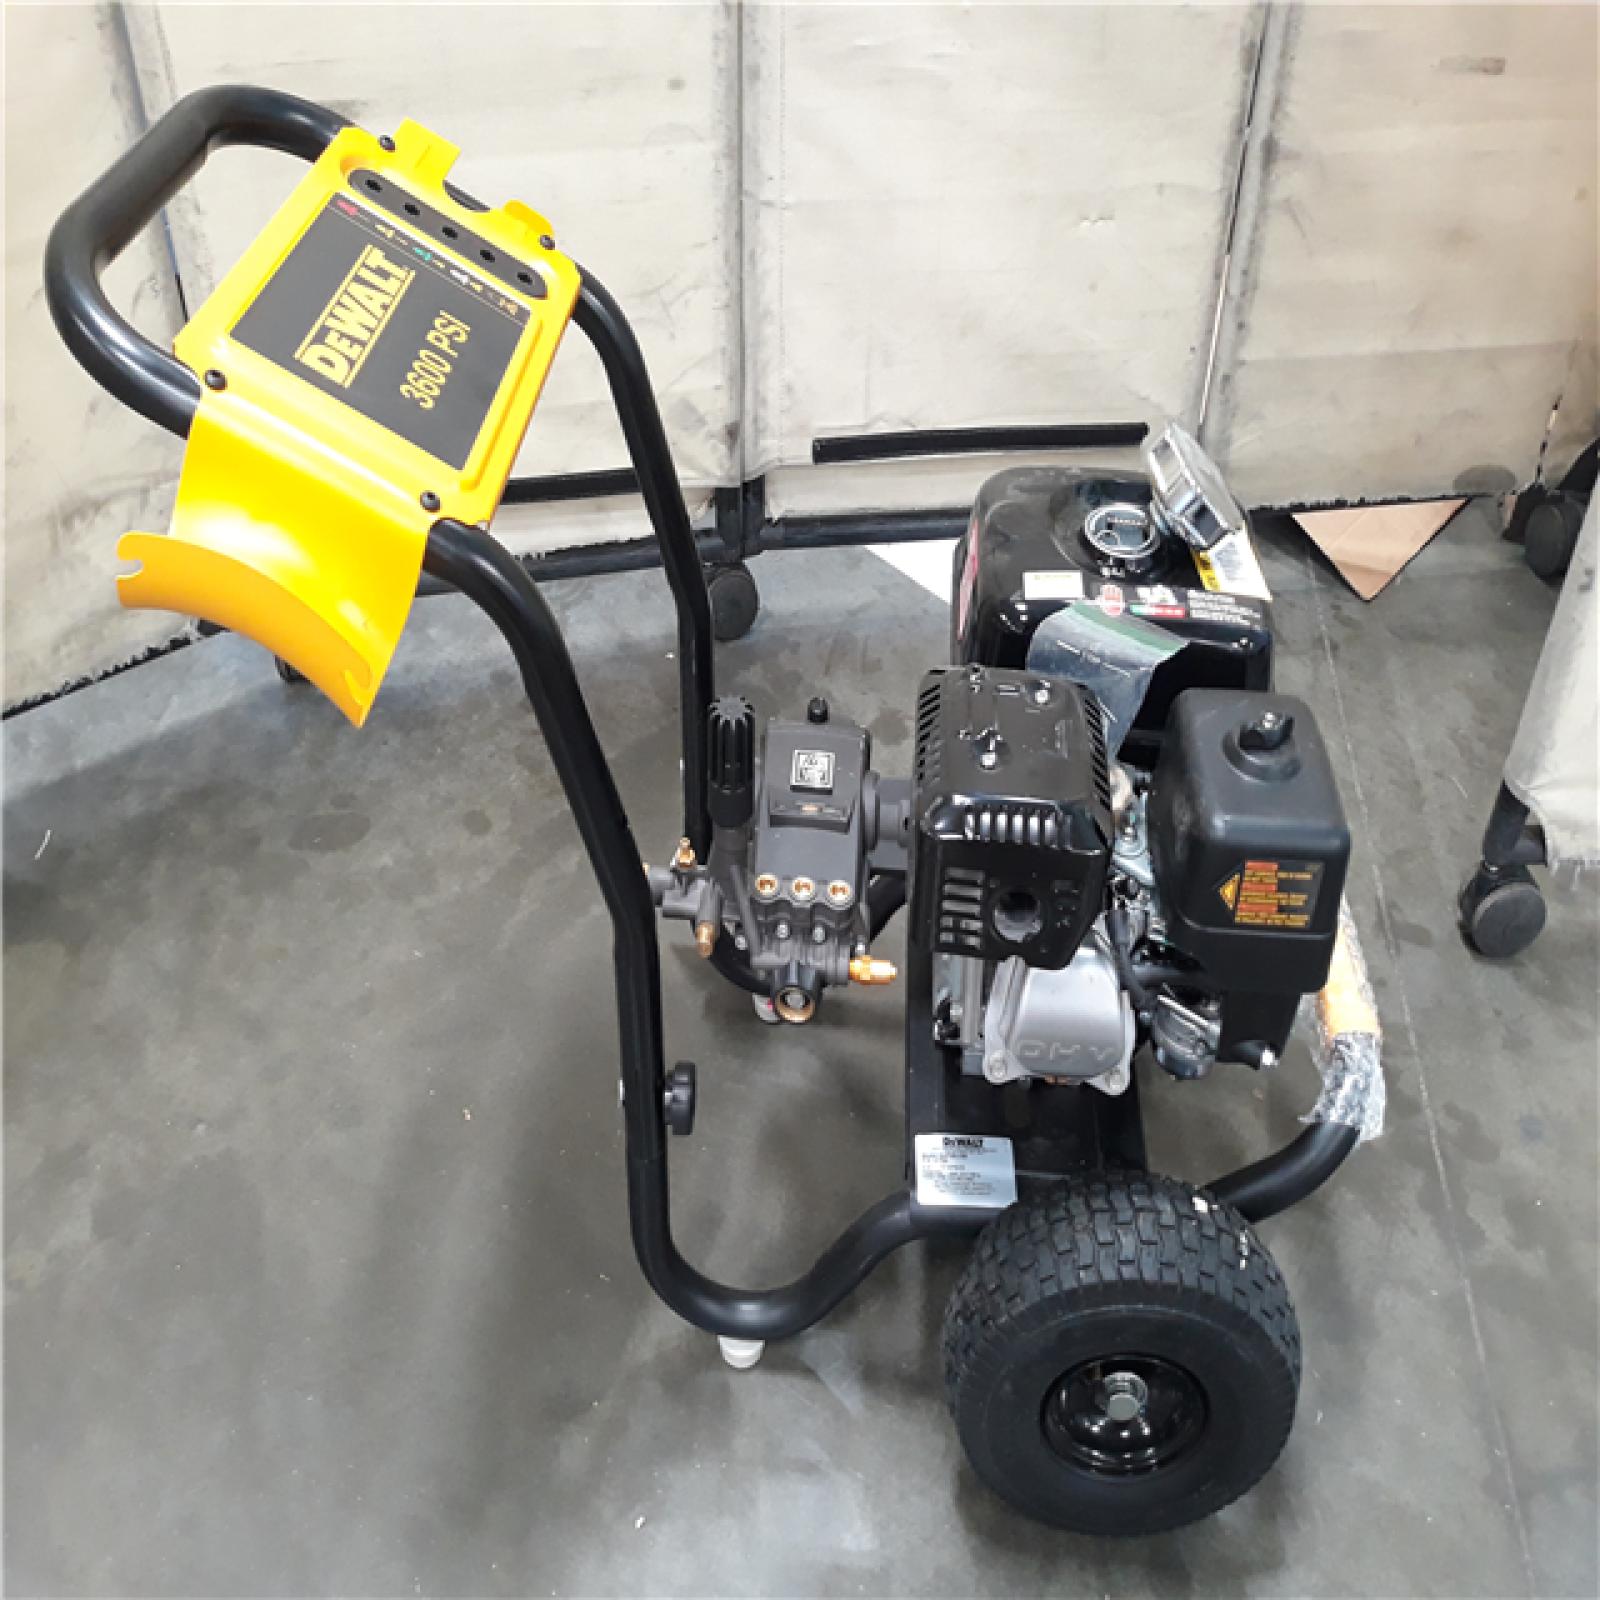 California AS-IS DeWalt 3600 Gas Pressure Washer -  Appears Like - New Condition